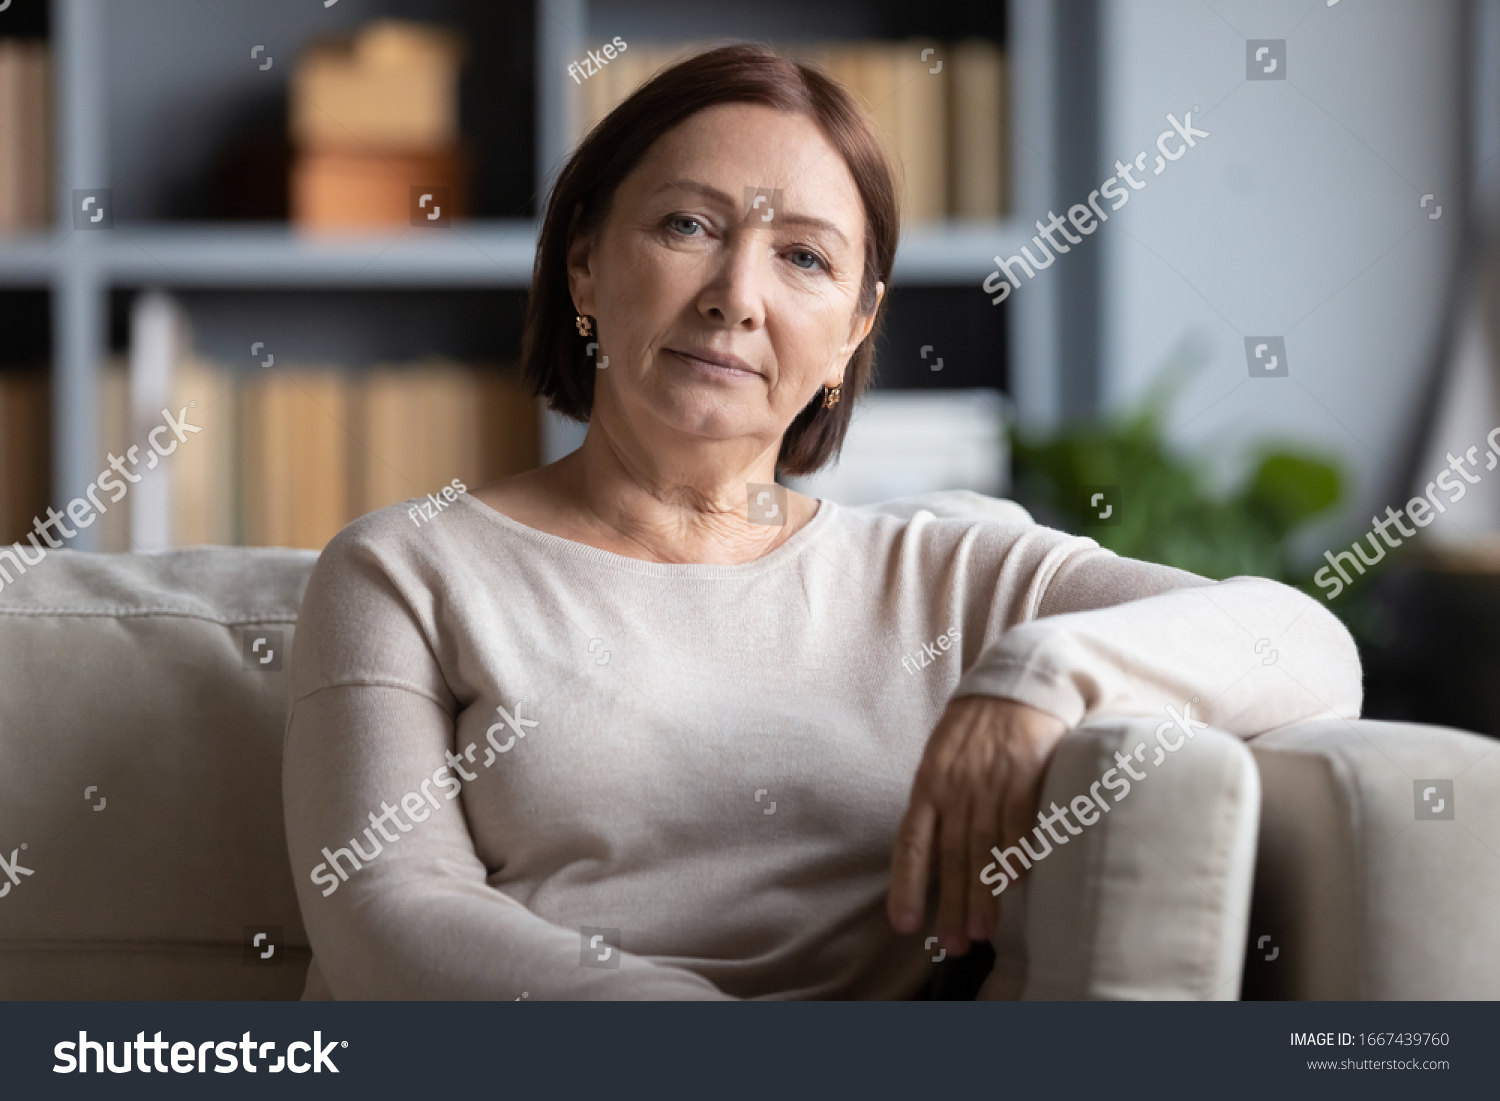 Head shot portrait peaceful tranquil middle aged old woman resting on cozy sofa alone at home. Pleasant happy senior mature 60s grandmother relaxing on couch in living room, posing for photo. #1667439760